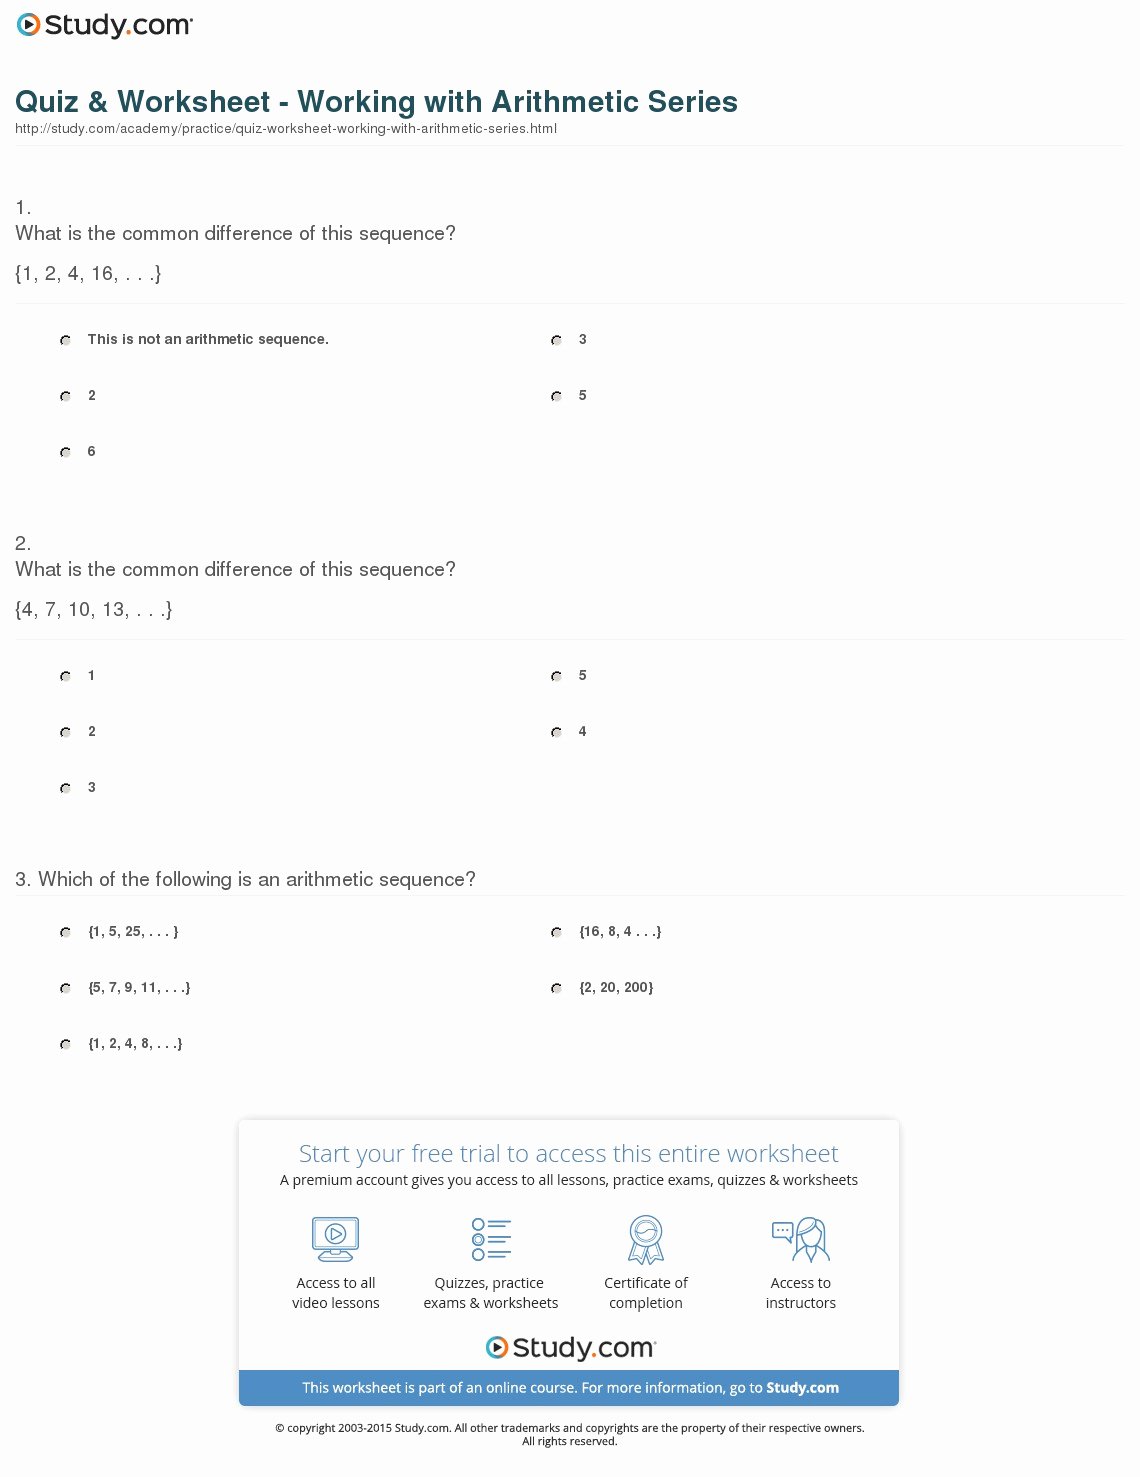 Arithmetic Sequences Worksheet Answers Best Of Dentrodabiblia Arithmetic Sequences Worksheet Answers